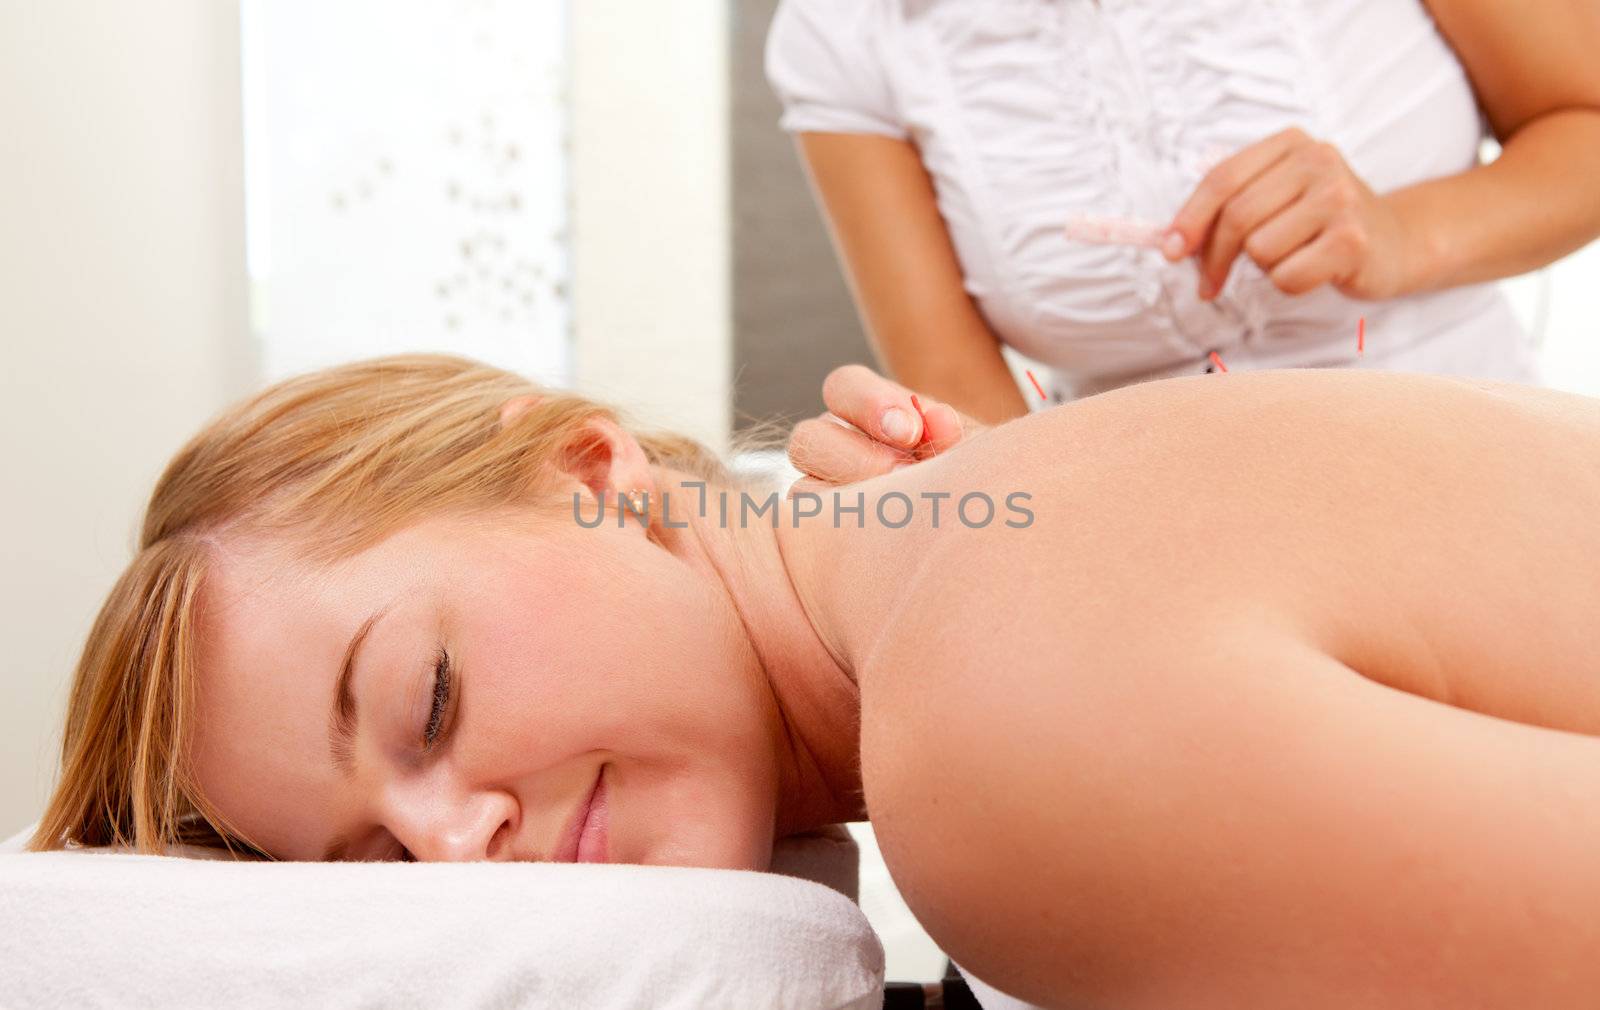 A relaxed woman receiving acupuncture on the back